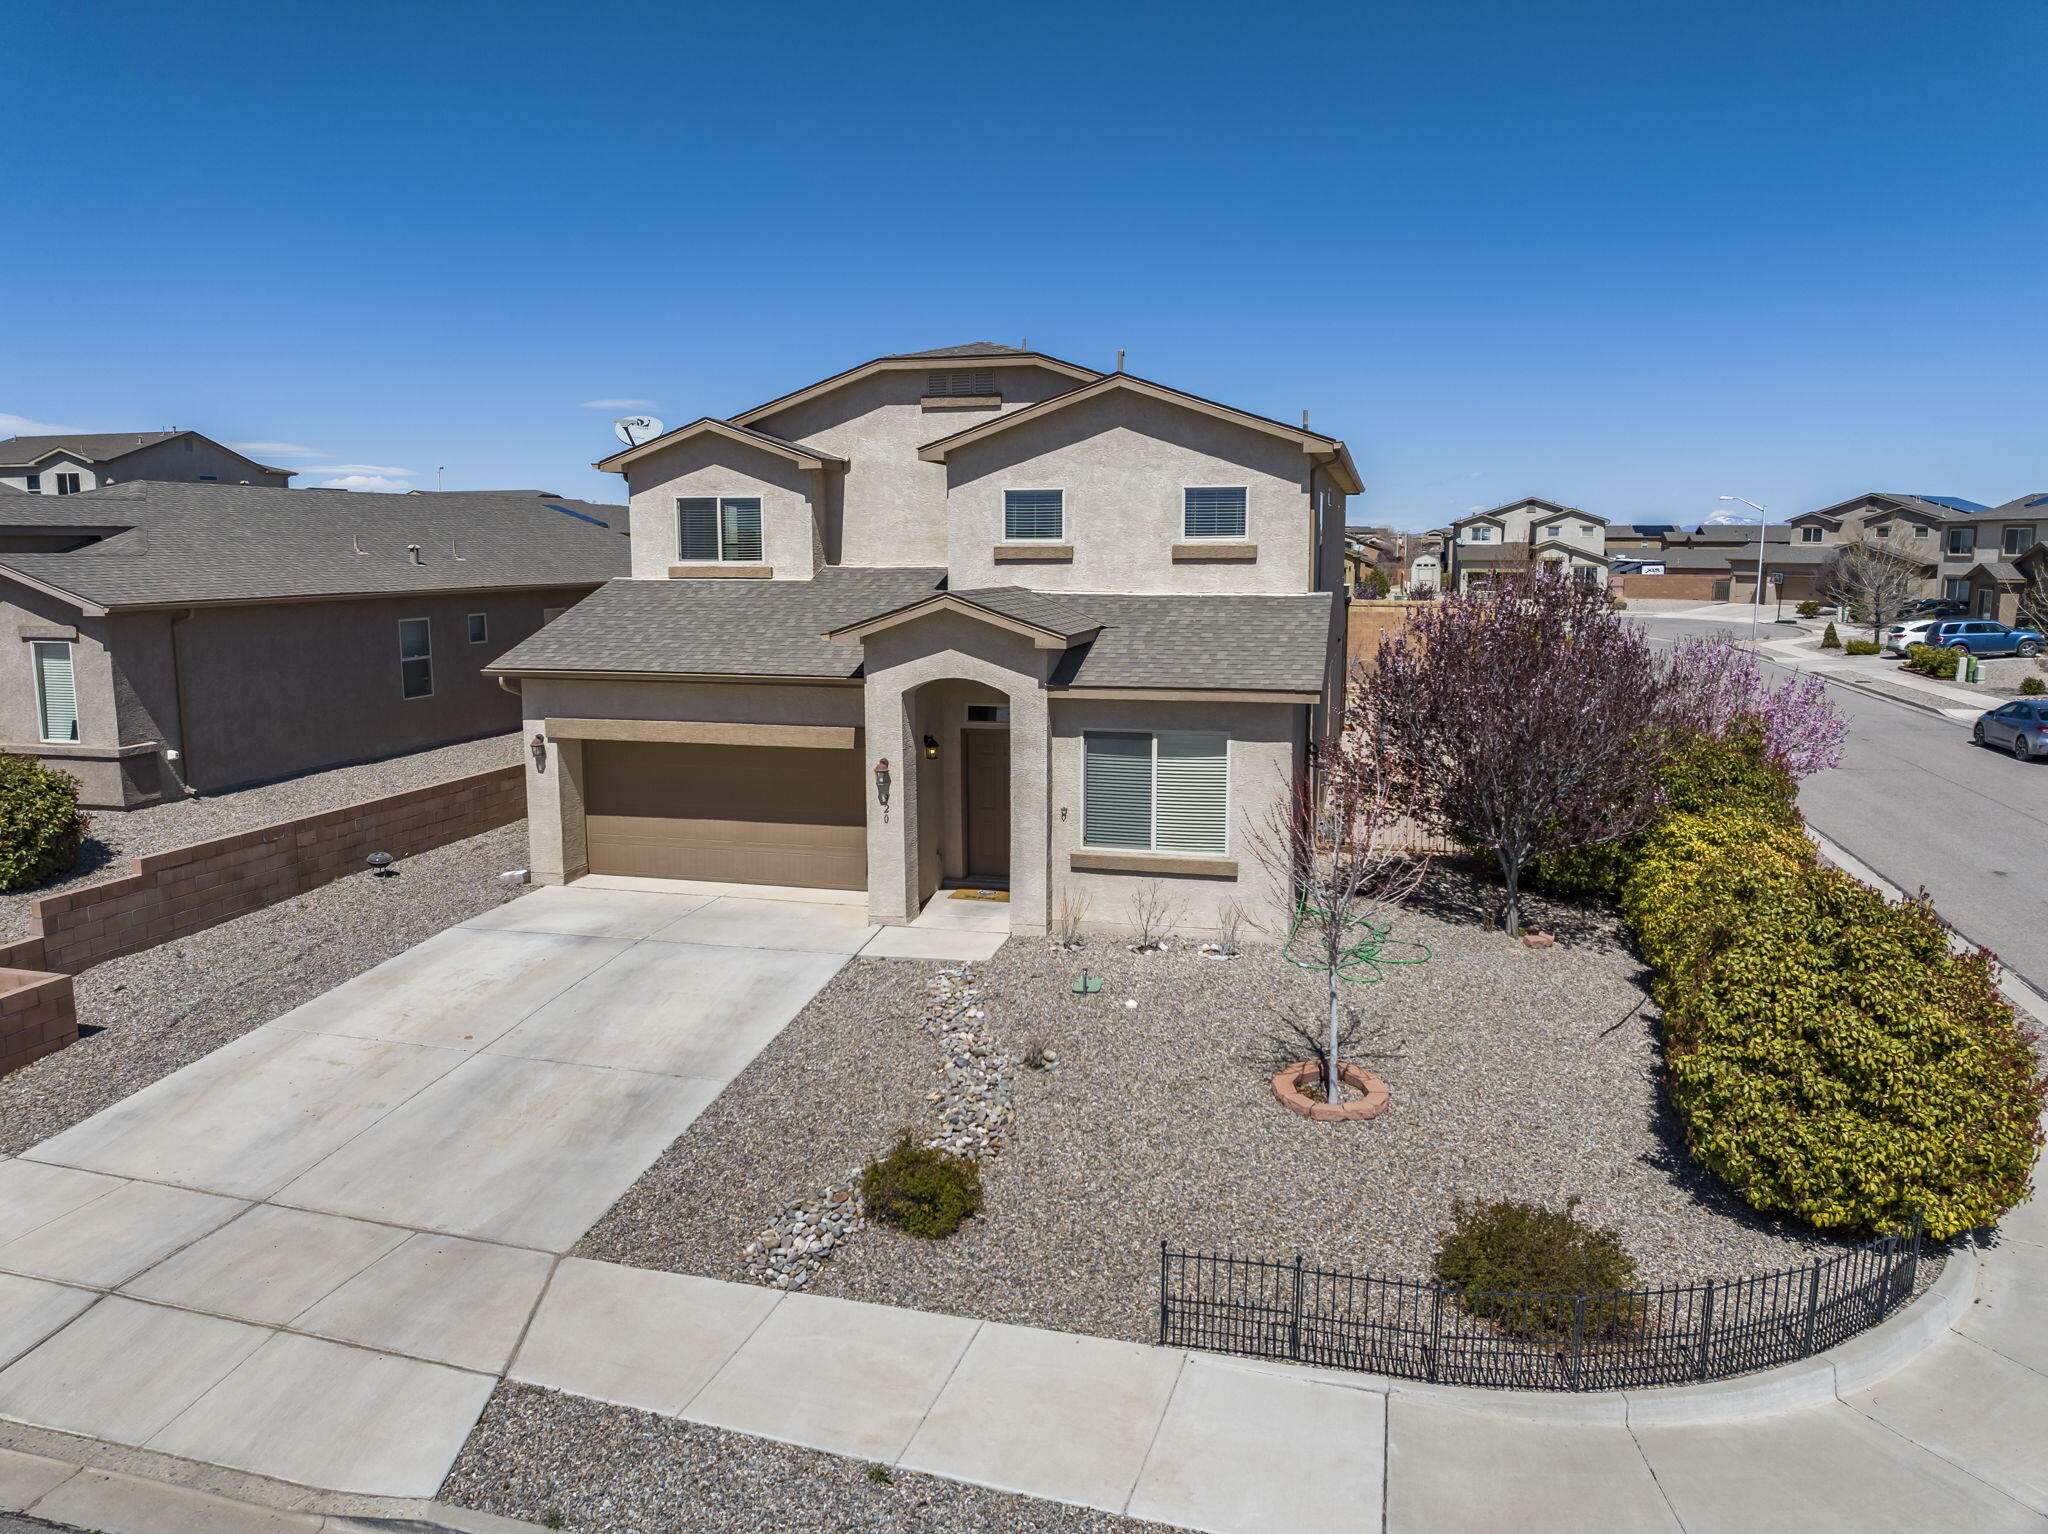 920 Crown Court NE, Rio Rancho, New Mexico 87124, 4 Bedrooms Bedrooms, ,4 BathroomsBathrooms,Residential,For Sale,920 Crown Court NE,1061254